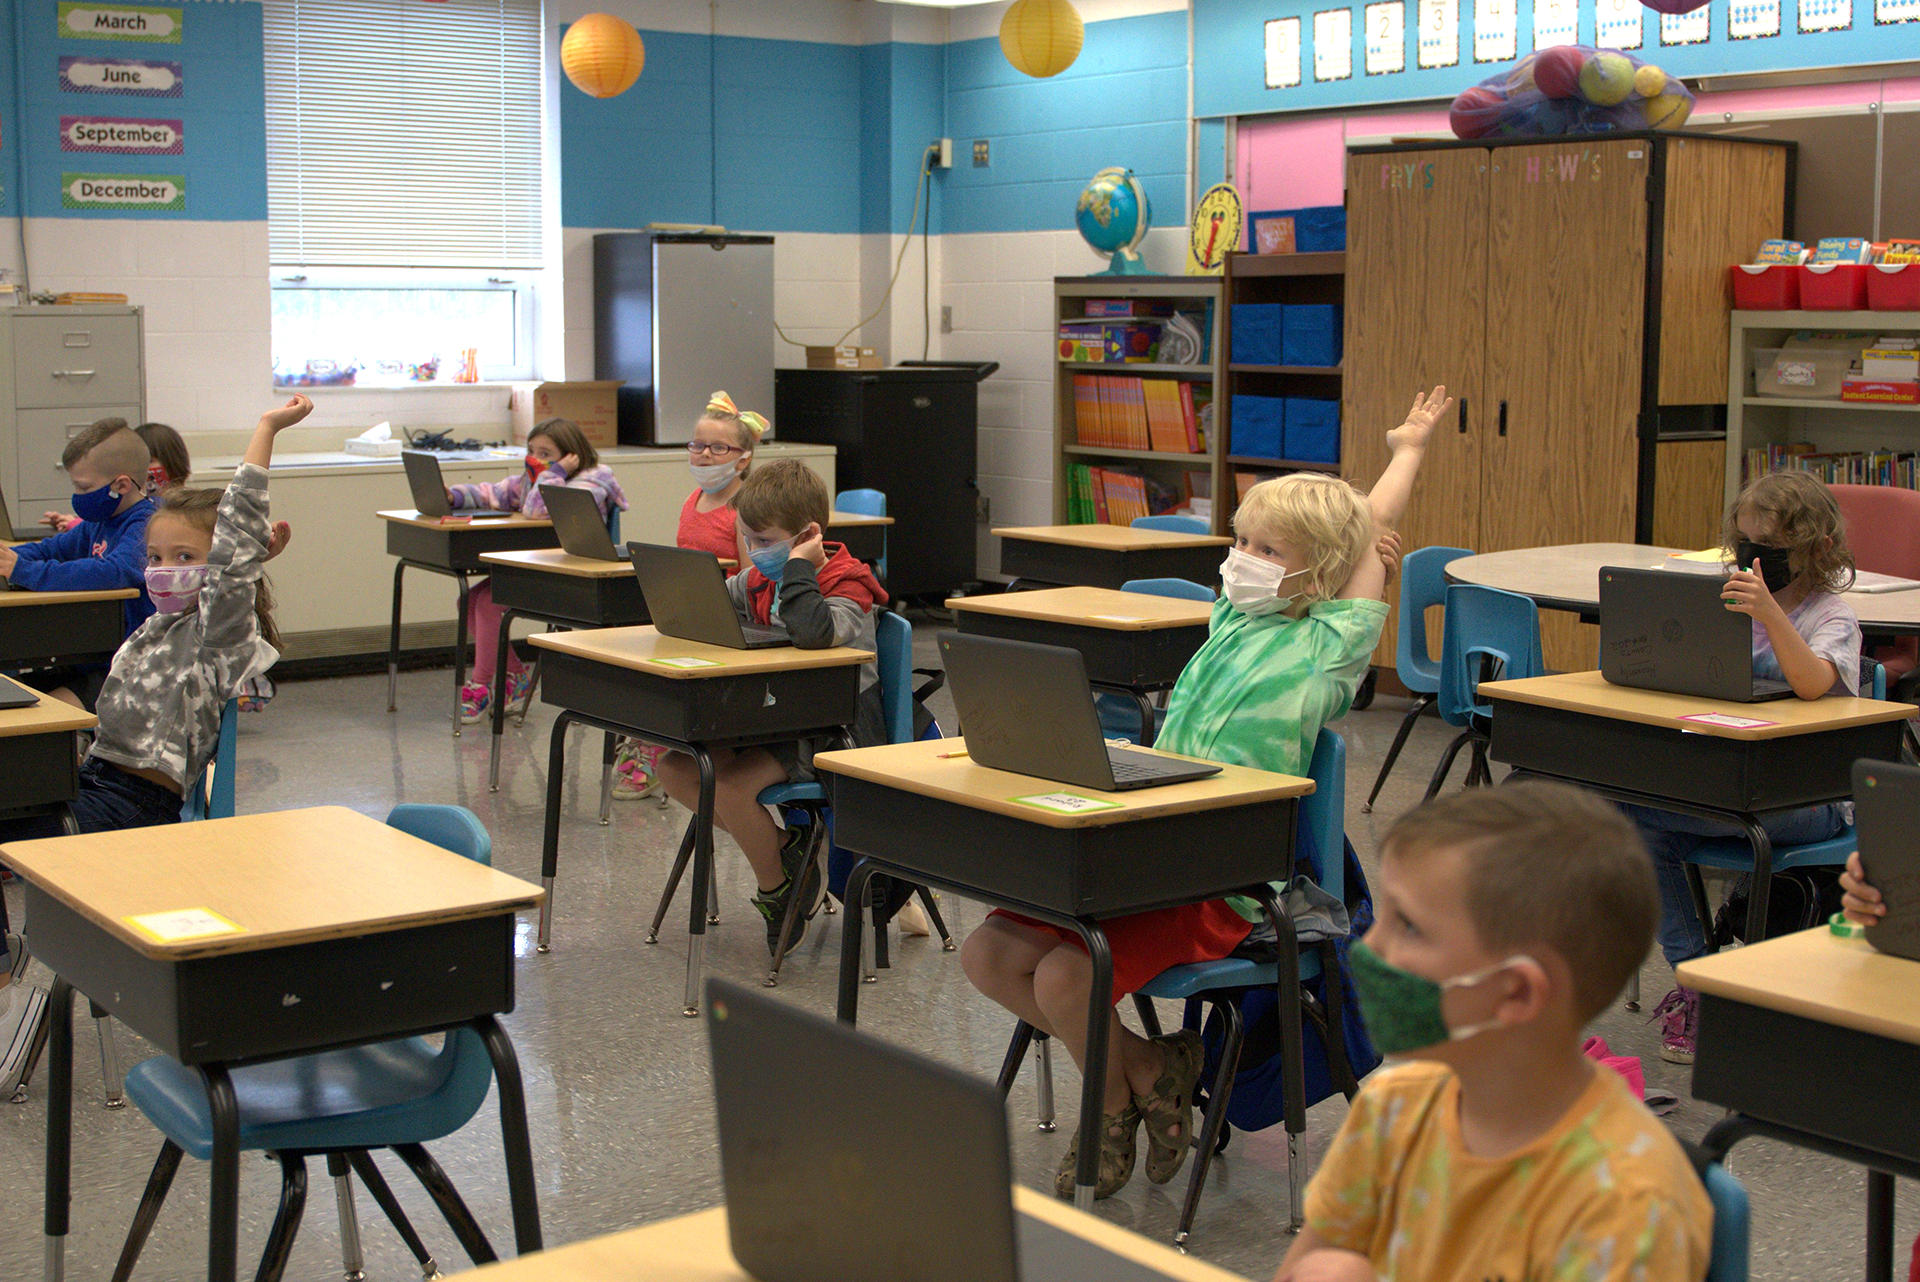 Students participate in a lesson while on their personal devices.